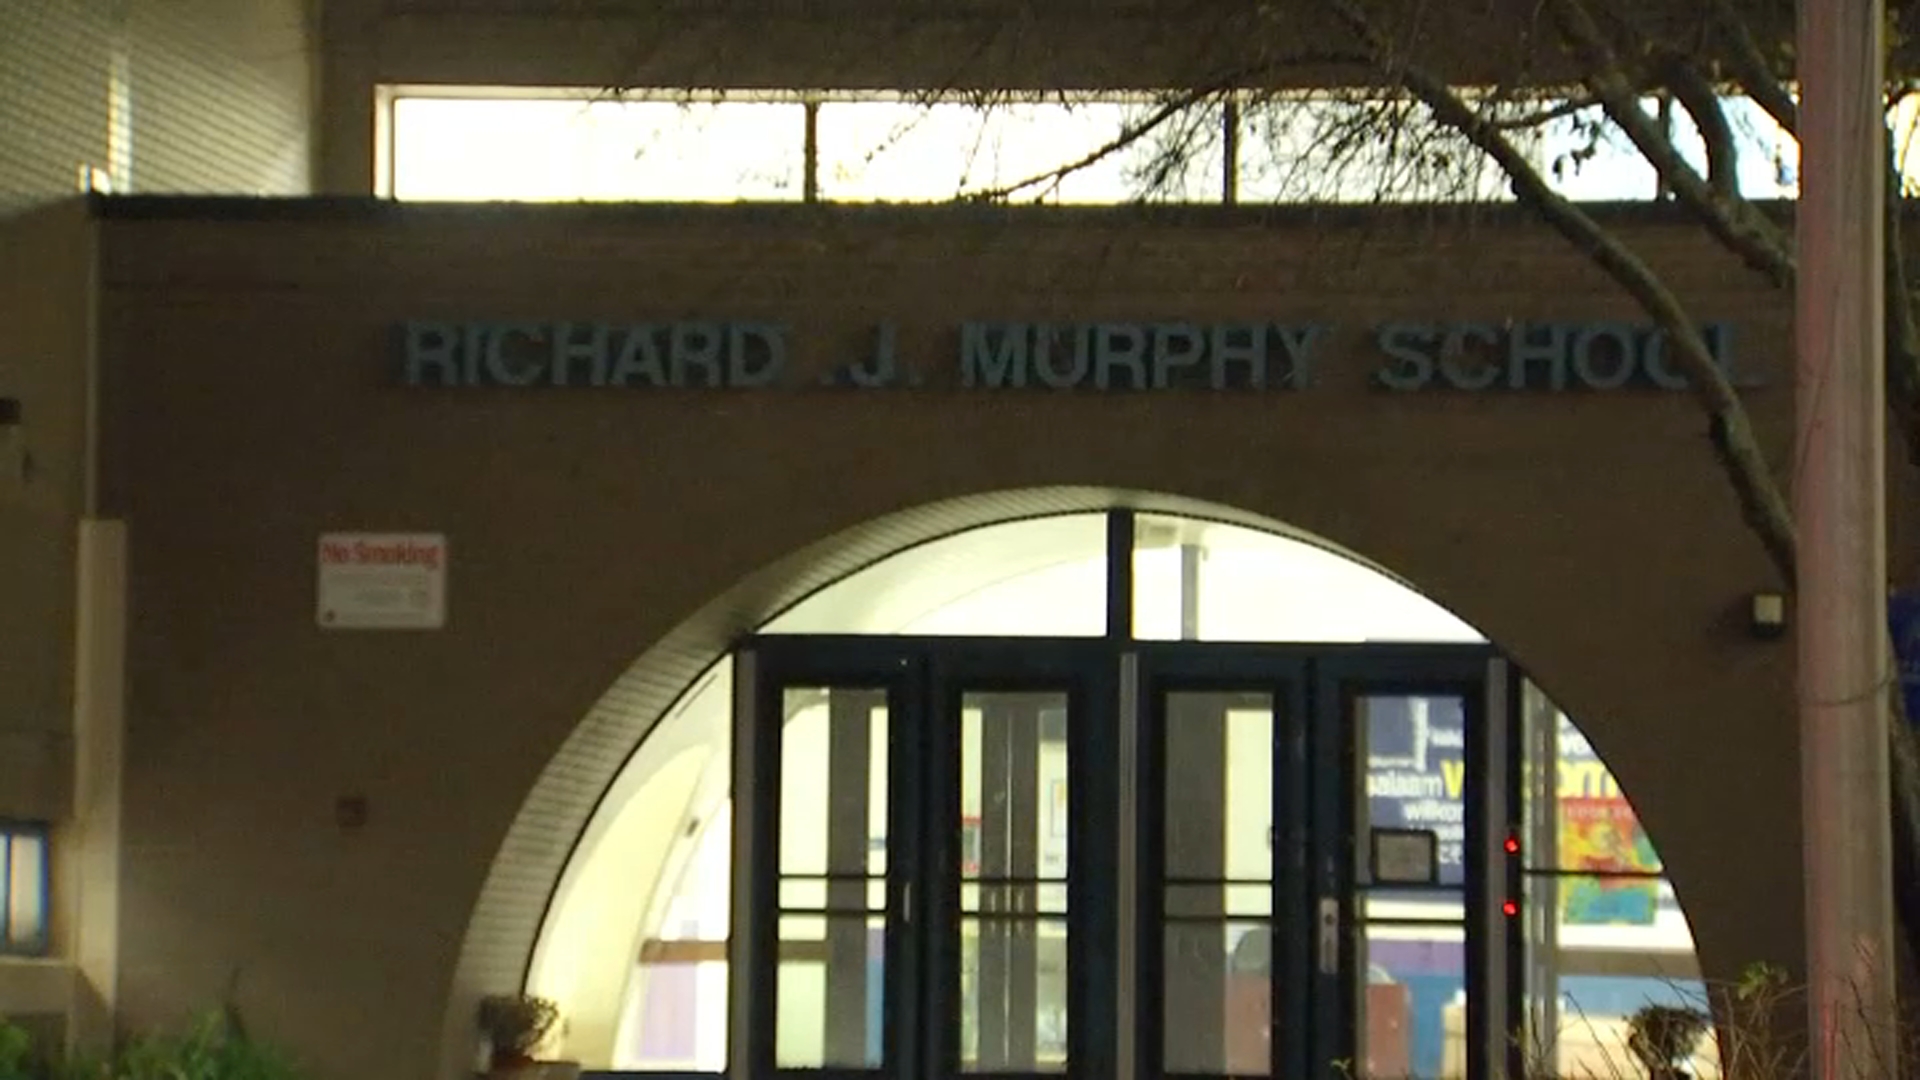 Concern, Outrage After Man Is Found Sleeping in Boston School